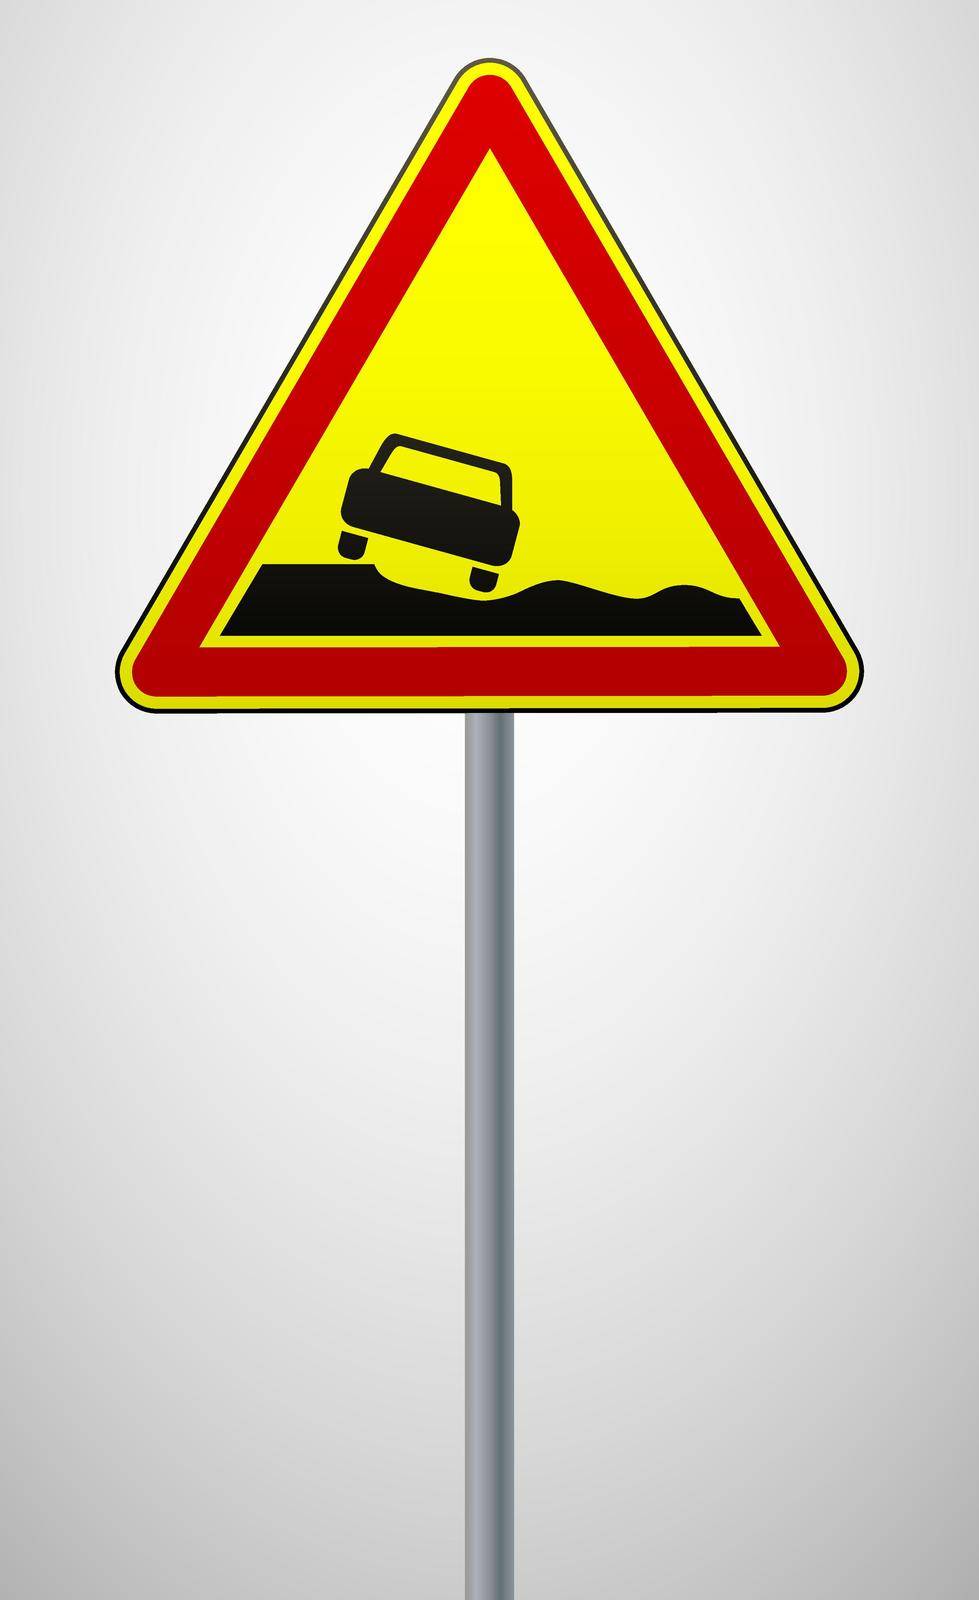 warning road sign dangerous roadside. triangular sign on a metal pole. traffic rules and safe driving. vector illustration. by Nikolaiev_Oleksii